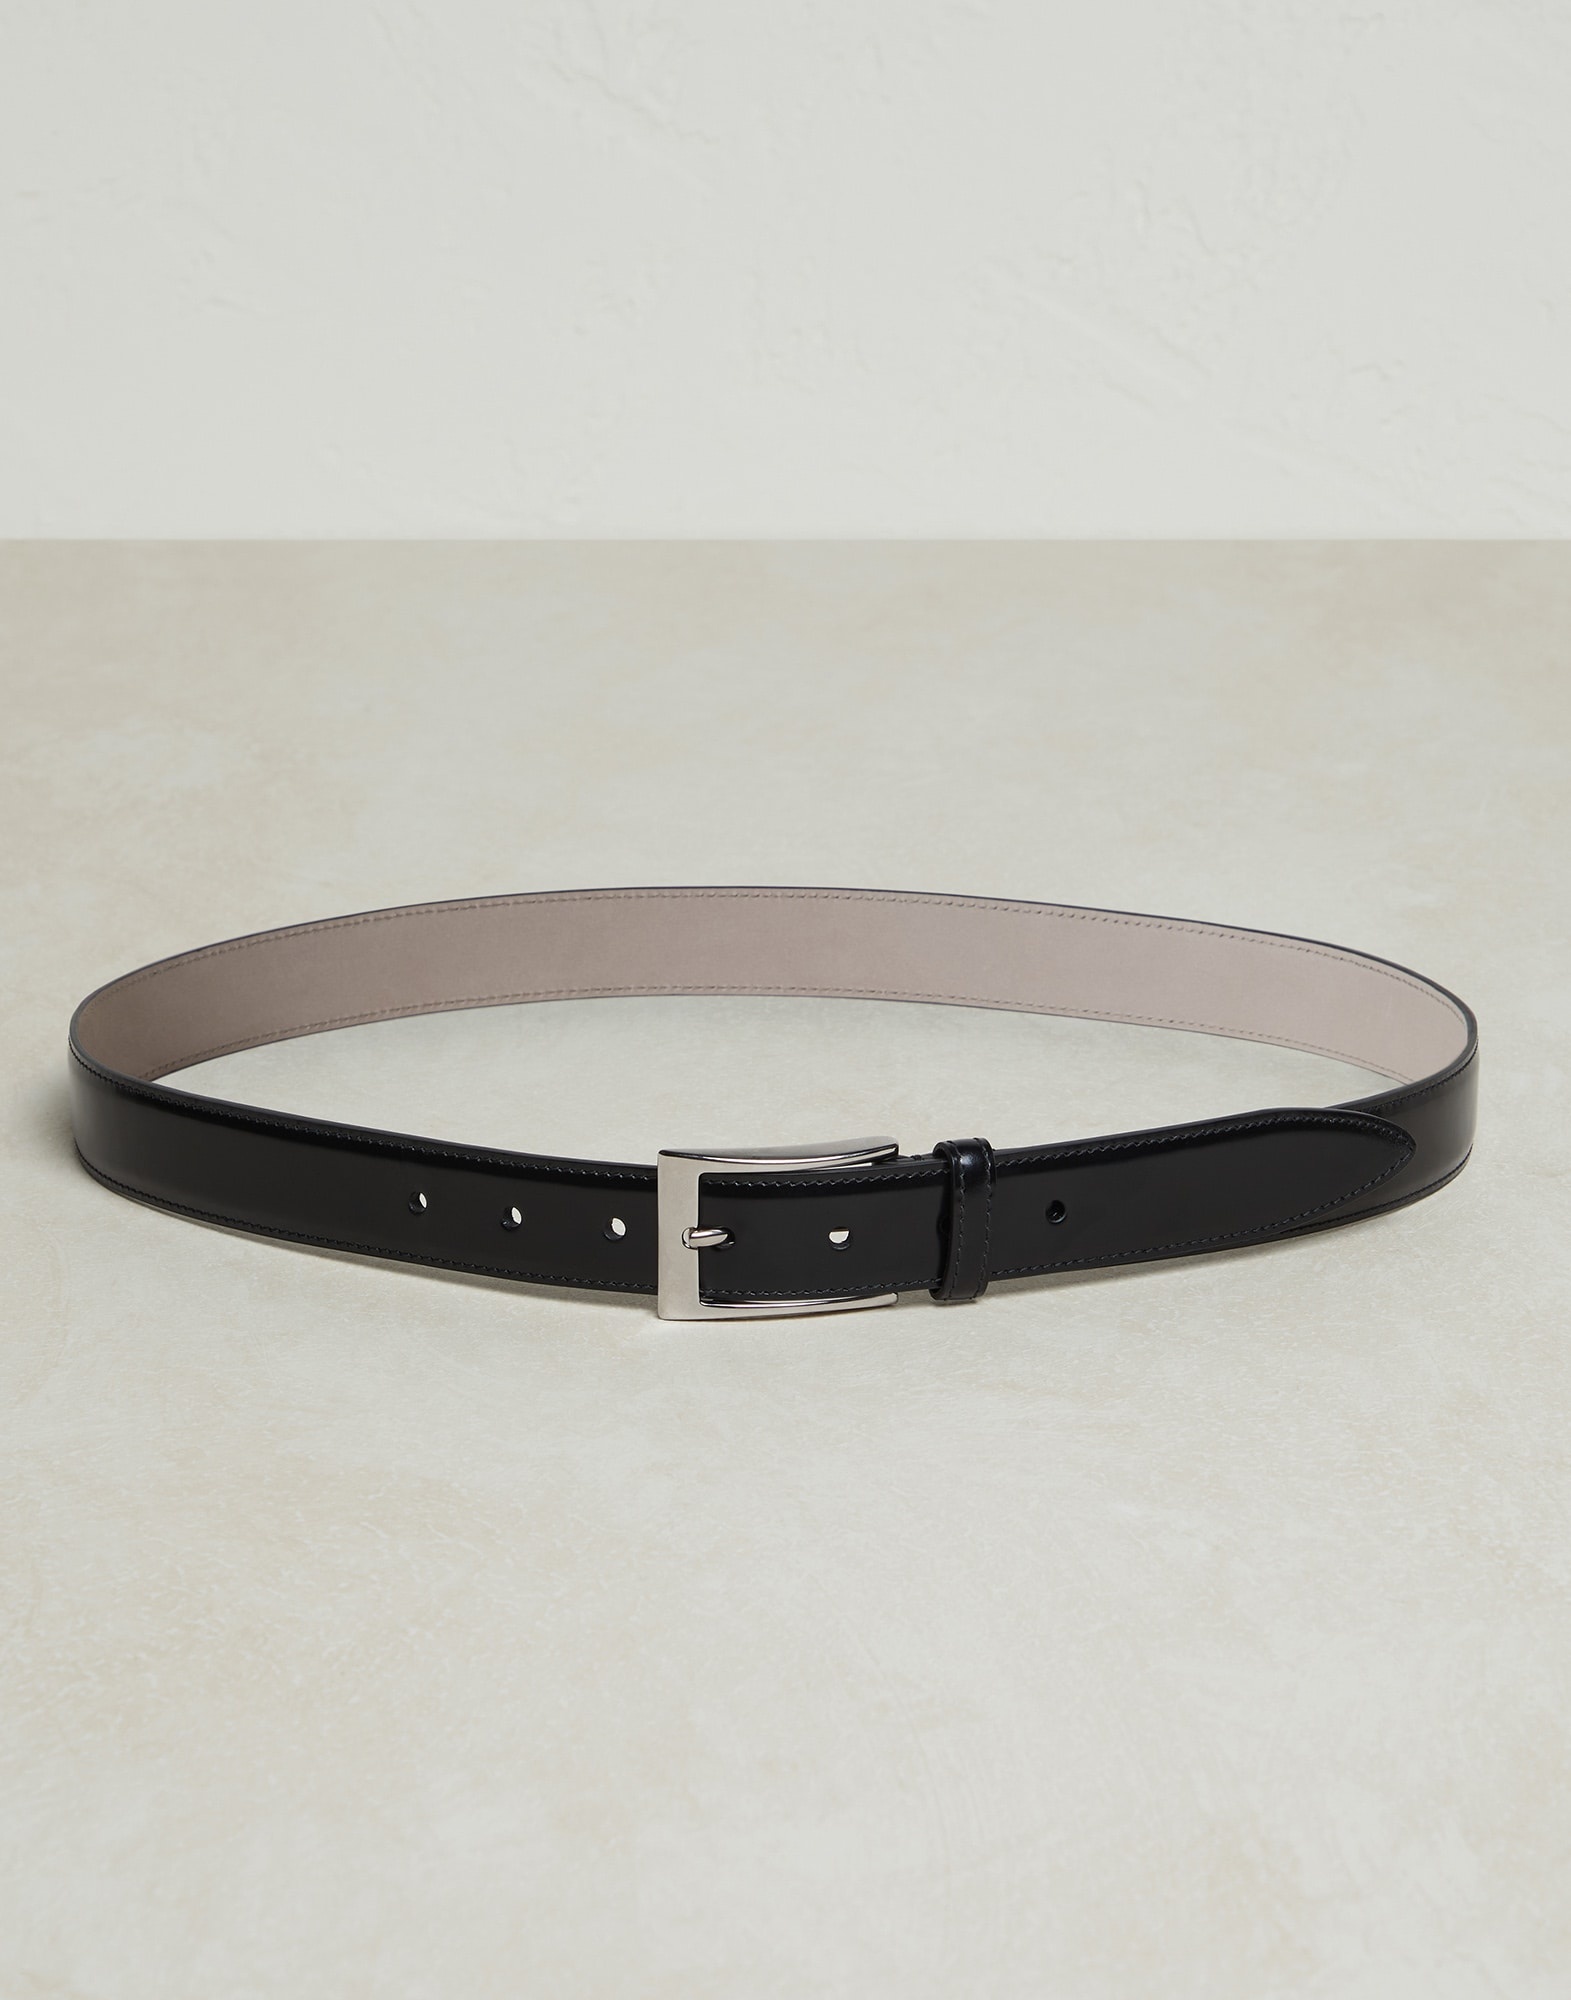 Formal calfskin belt with square buckle - 1